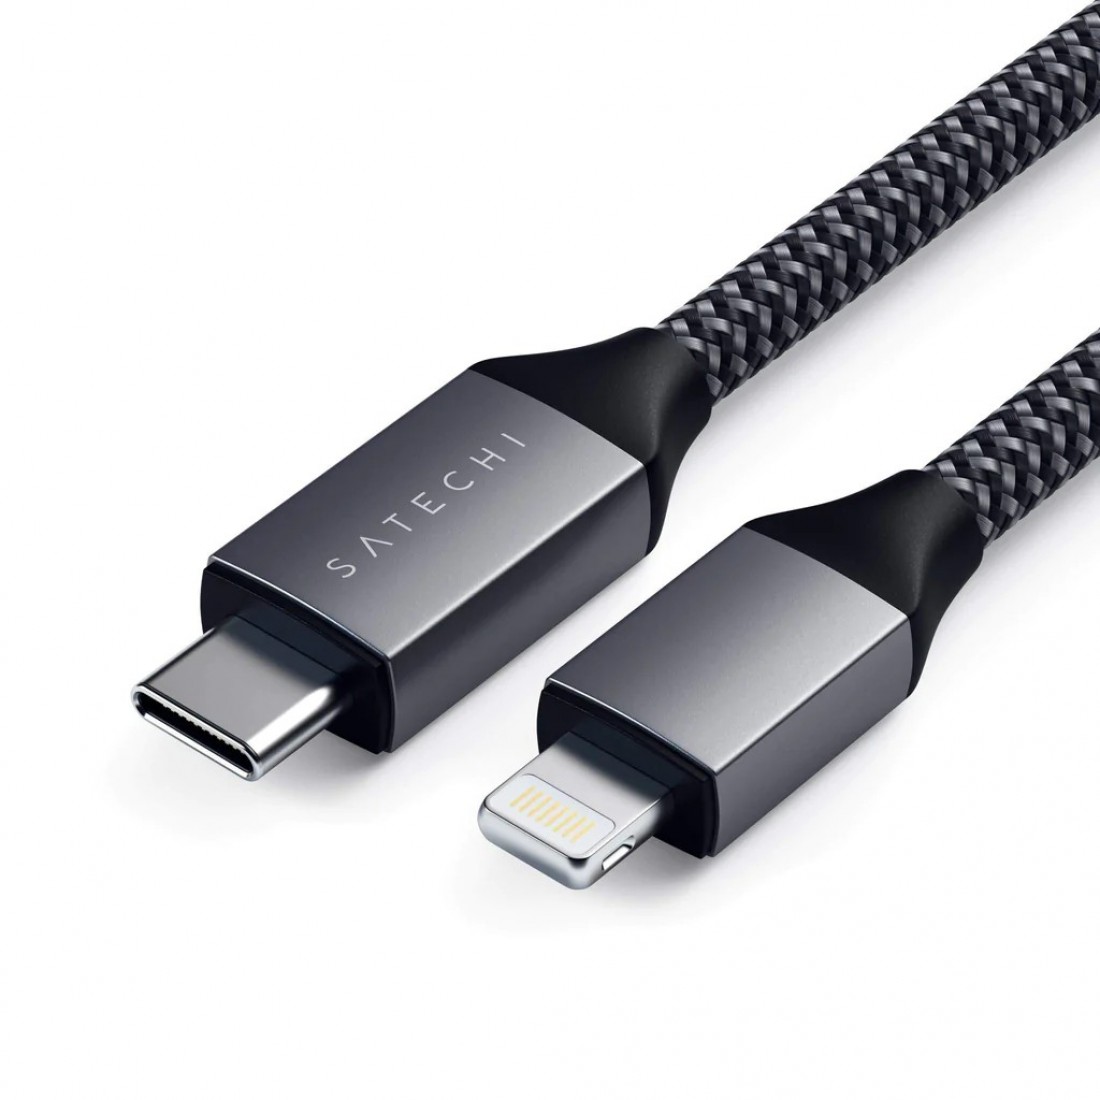 Кабель USB-C to Lightning Satechi Cable Space Gray (25 cm) (ST-TCL10M)